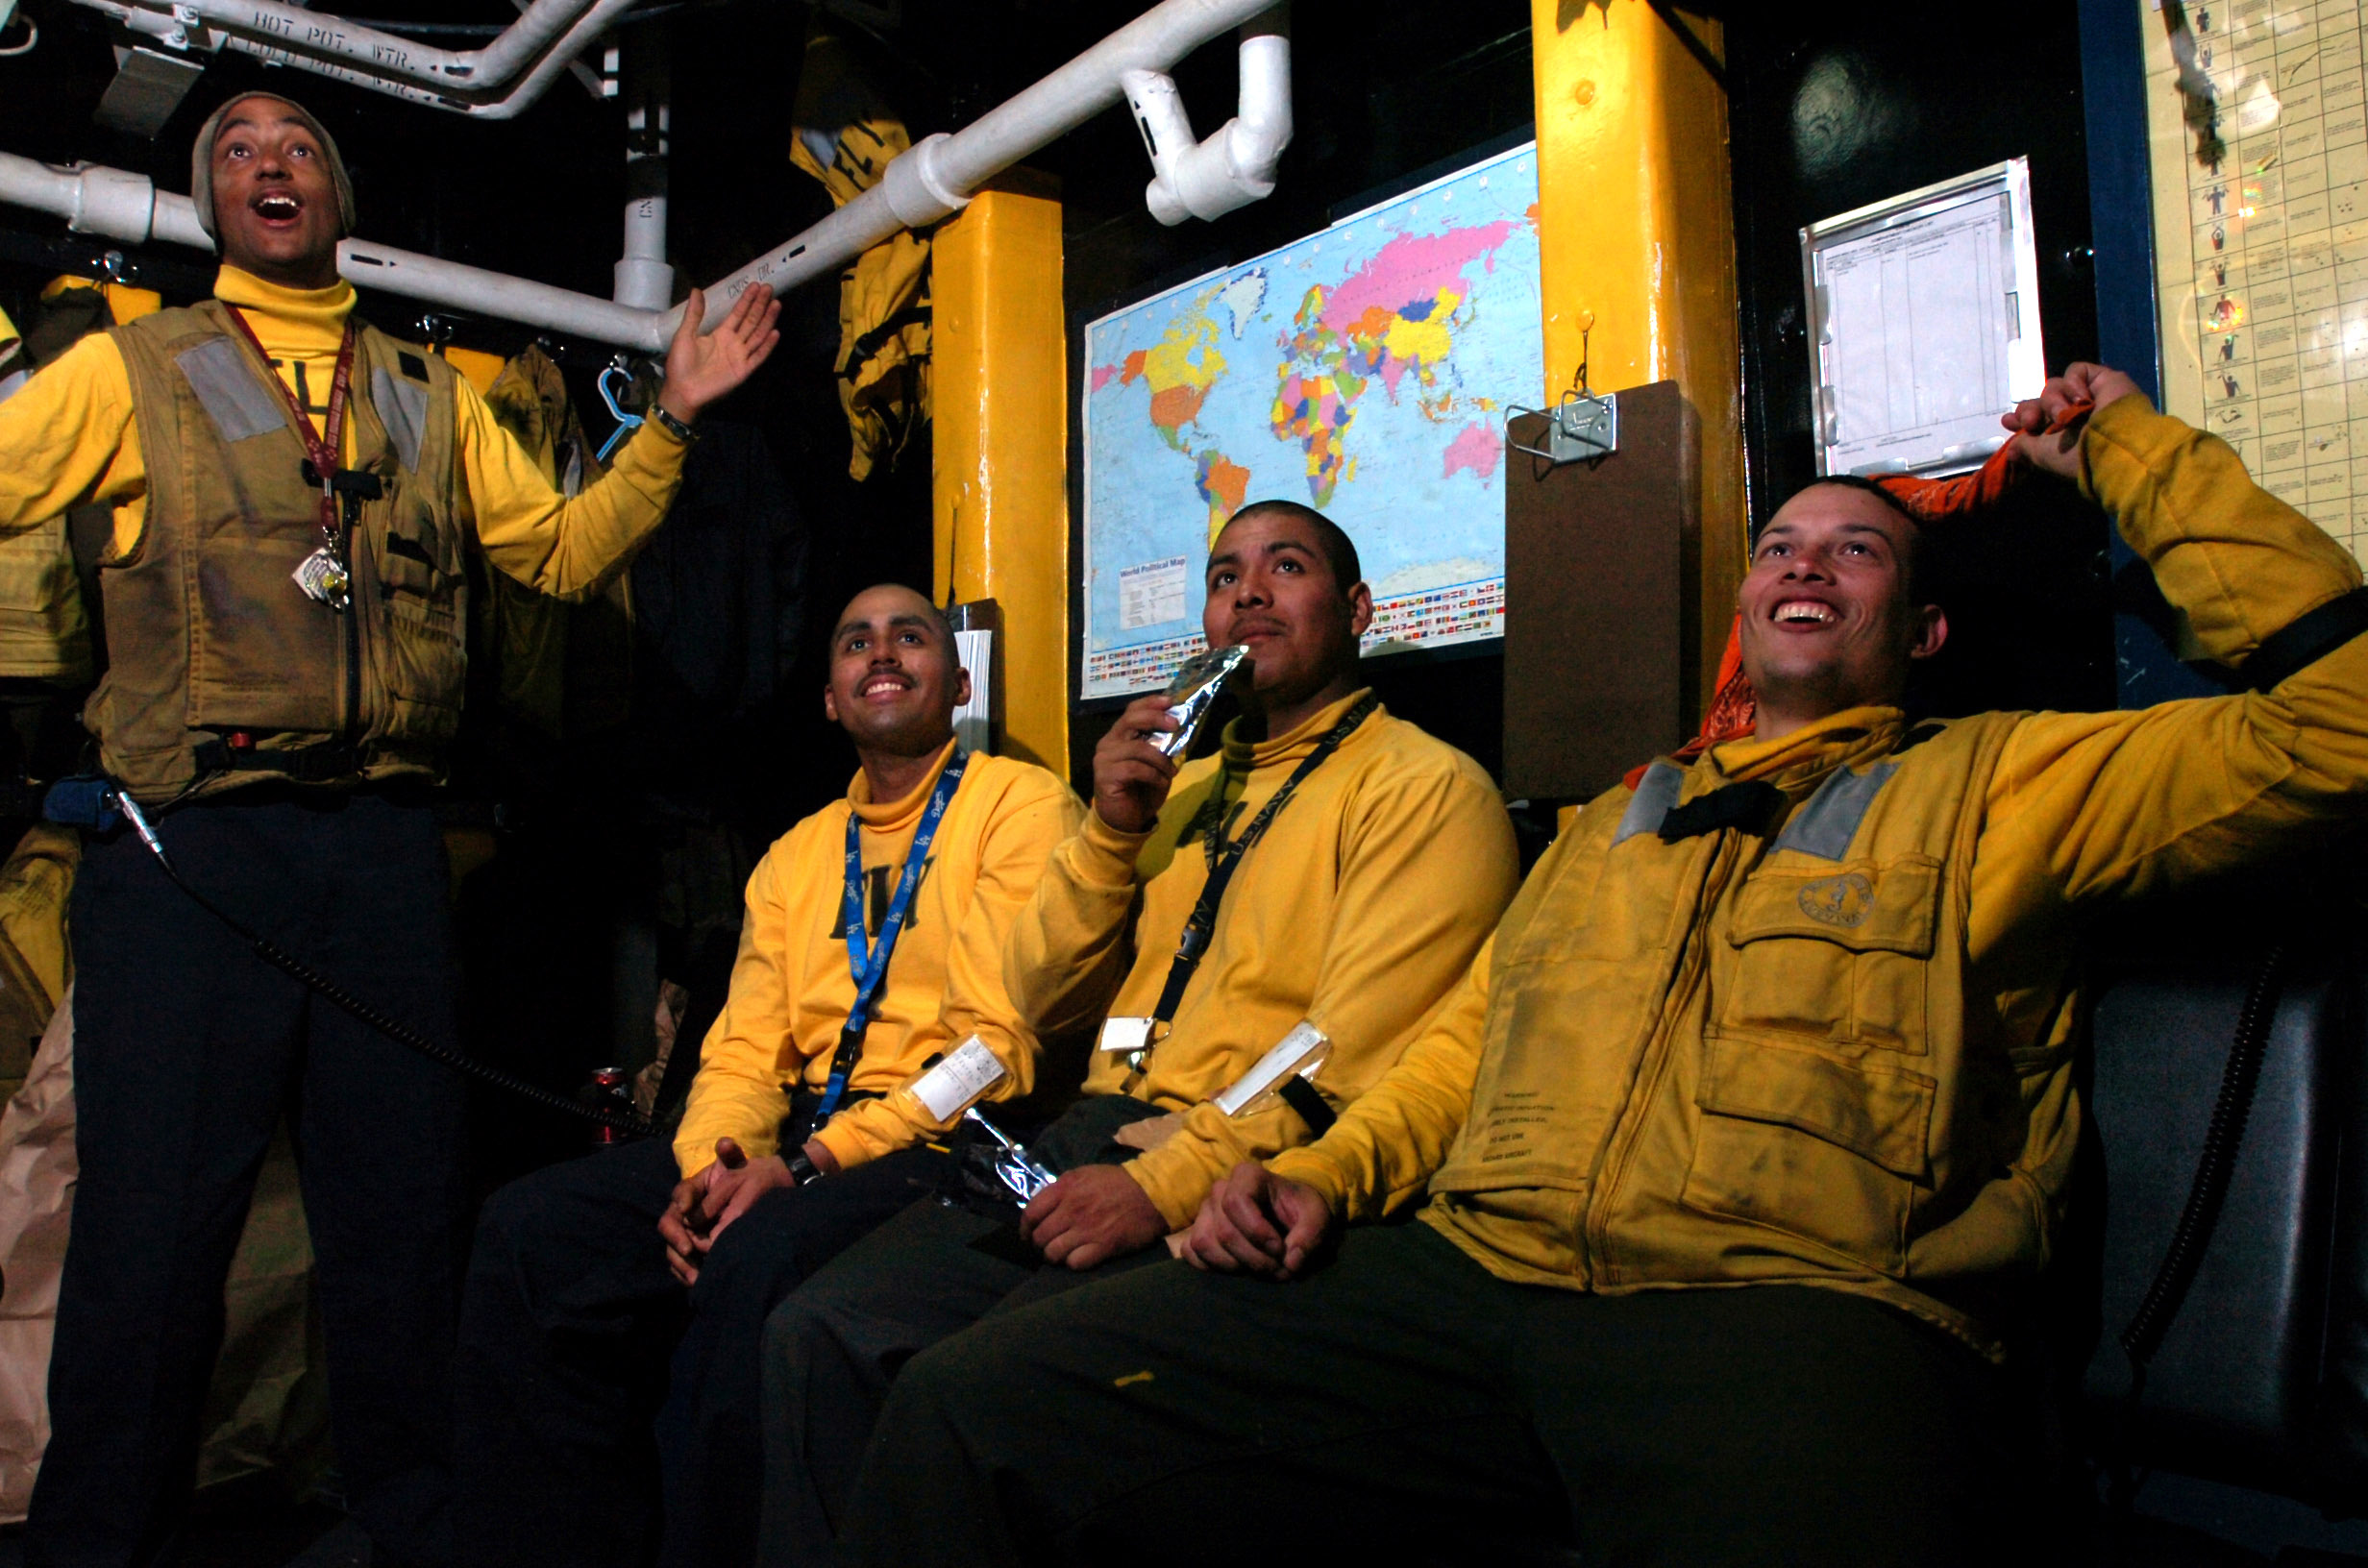 US Navy 070204-N-0555B-158 Just off the flight deck aboard Nimitz-class aircraft carrier USS Ronald Reagan (CVN 76), aviation boatswain's mates (Handling) use their time in between launch cycles to watch Super Bowl XLI